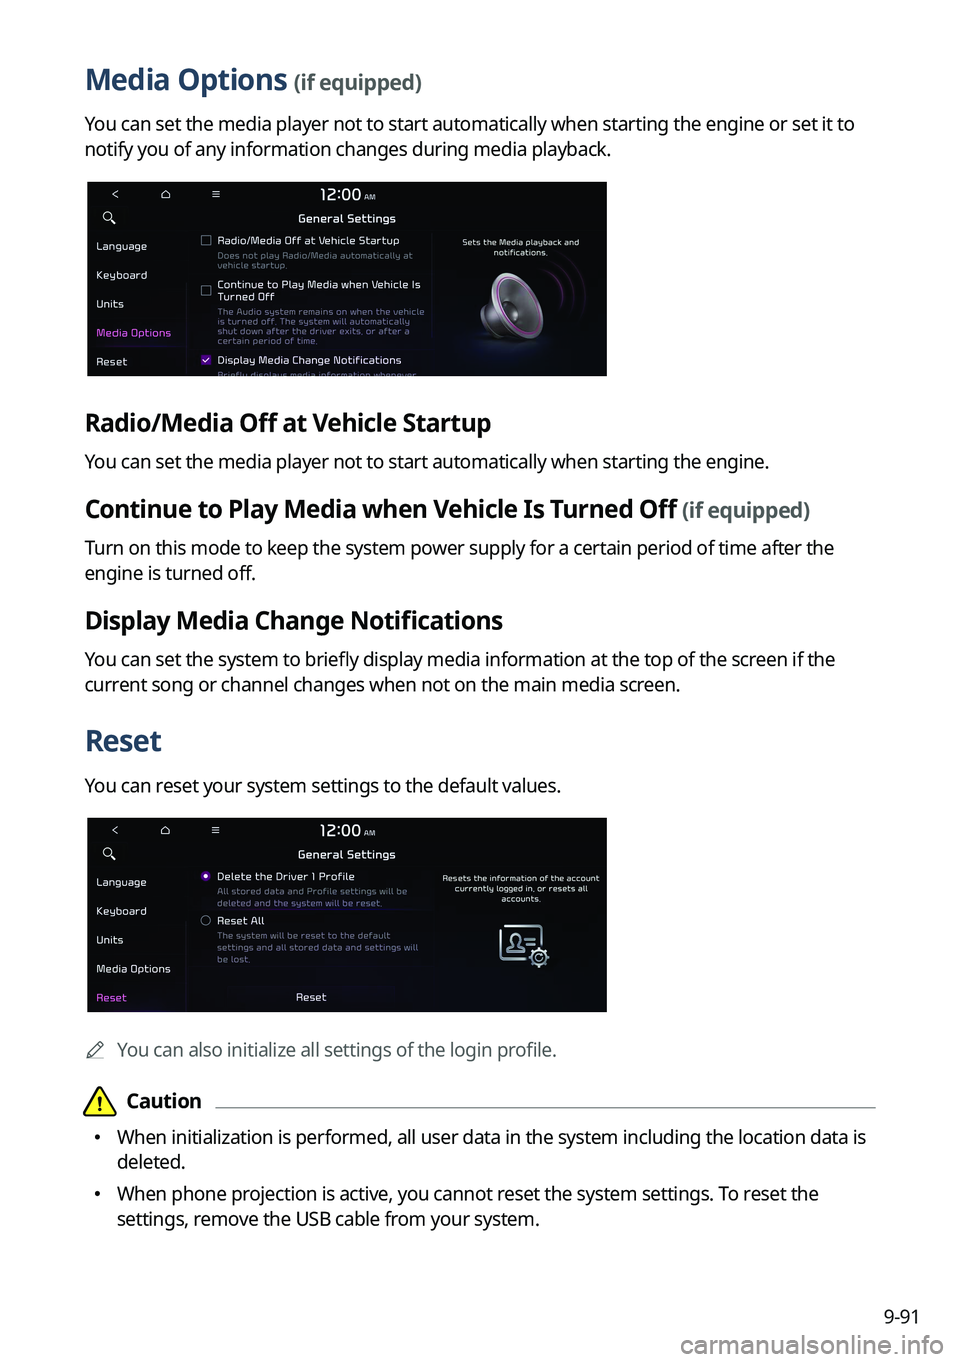 KIA SORENTO 2023  Navigation System Quick Reference Guide 9-91
Media Options (if equipped)
You can set the media player not to start automatically when starting the\
 engine or set it to 
notify you of any information changes during media playback.
Radio/Med